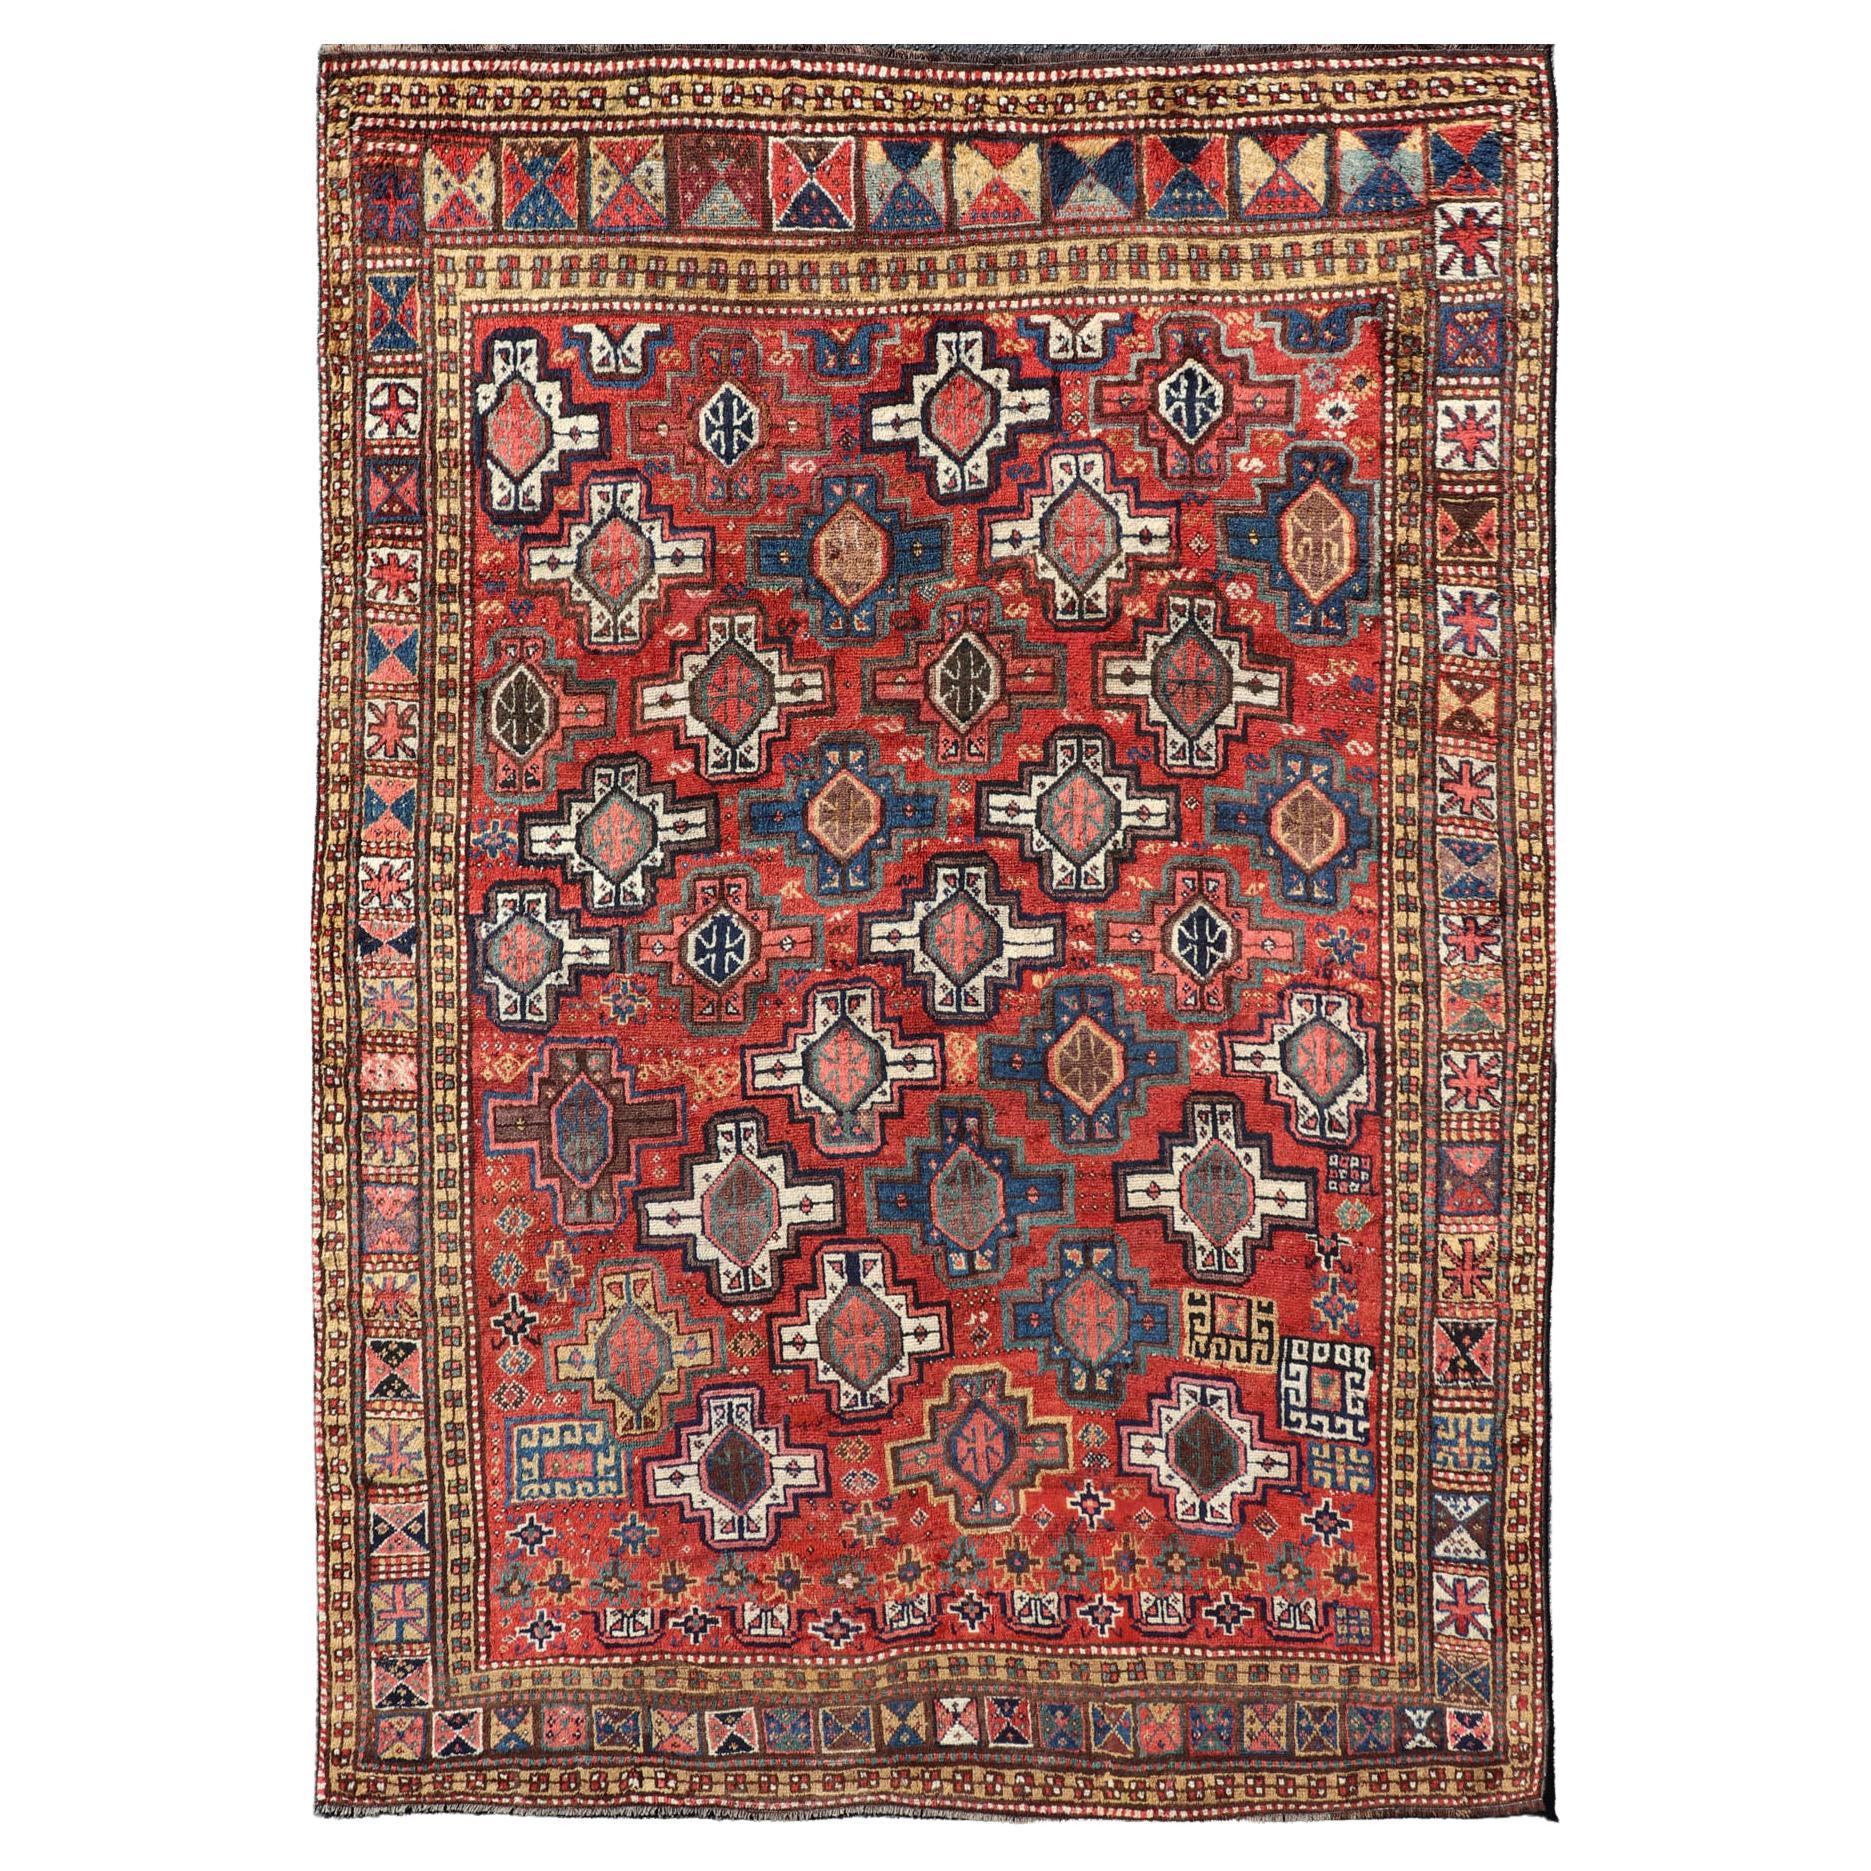 Antique Caucasian Kazak Rug with All-Over Tribal and Medallion Design